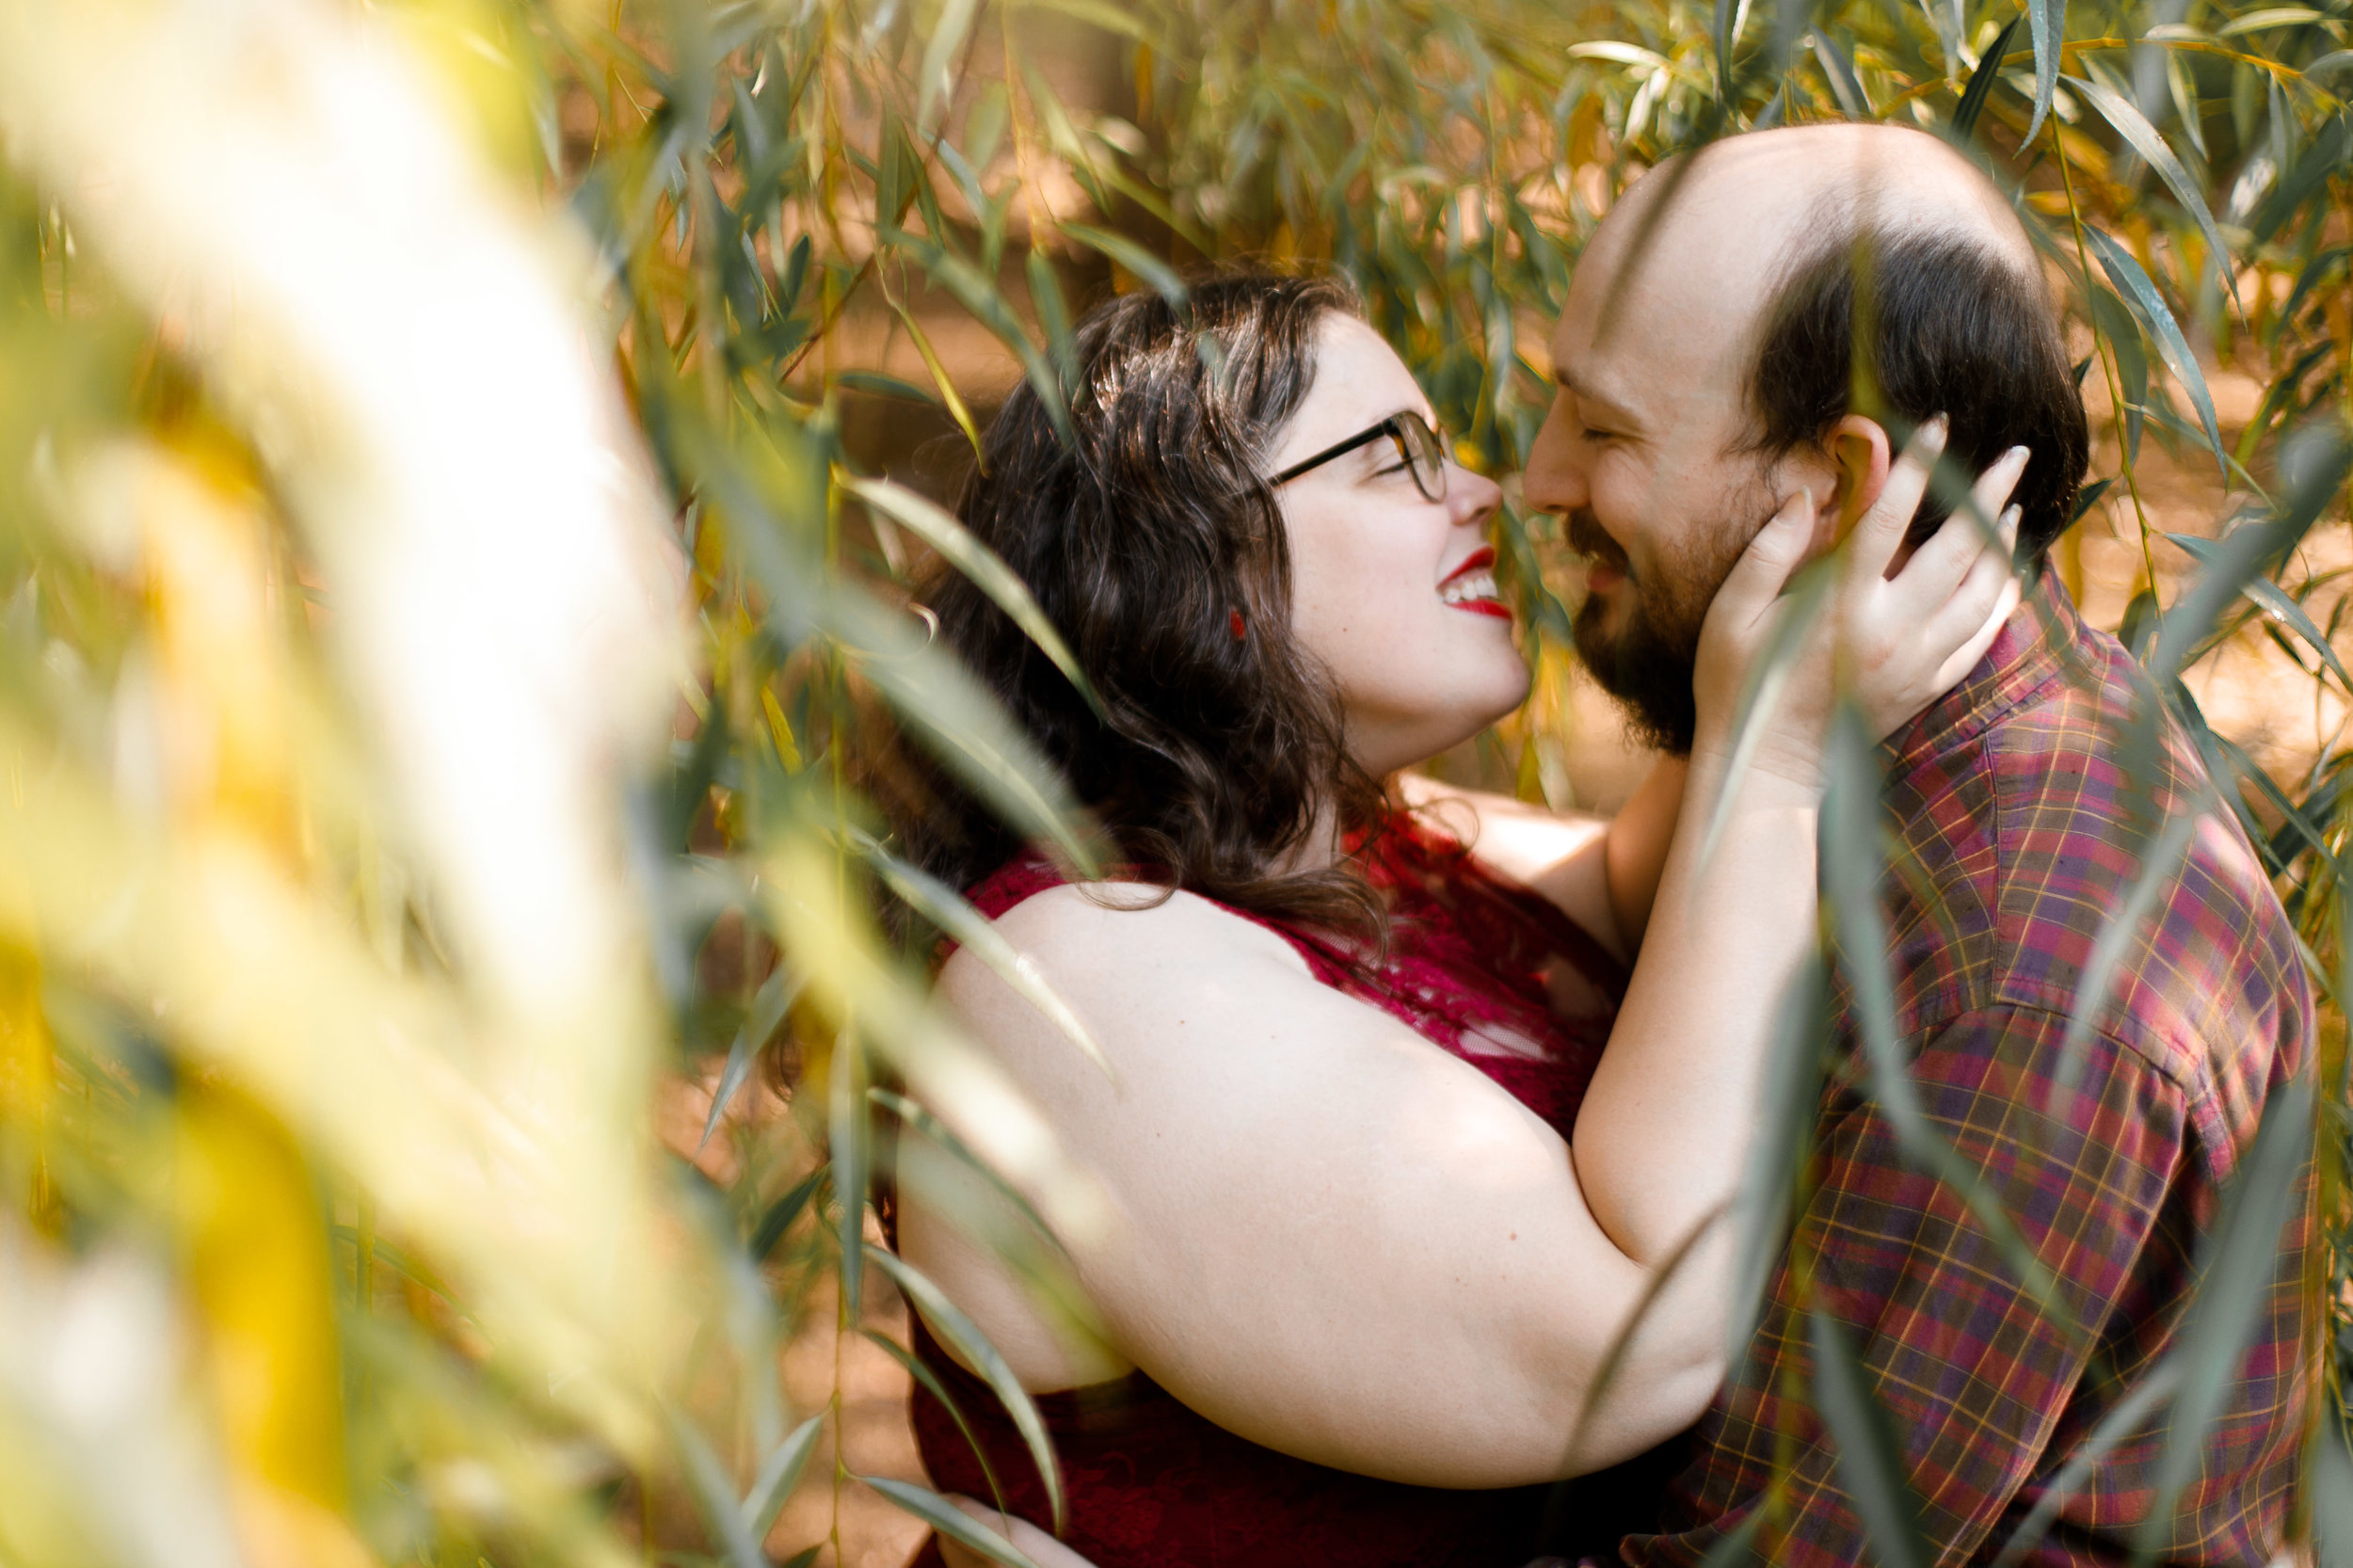 D&A Old City Philly Couples Session Photo Location Ideas 22.jpg